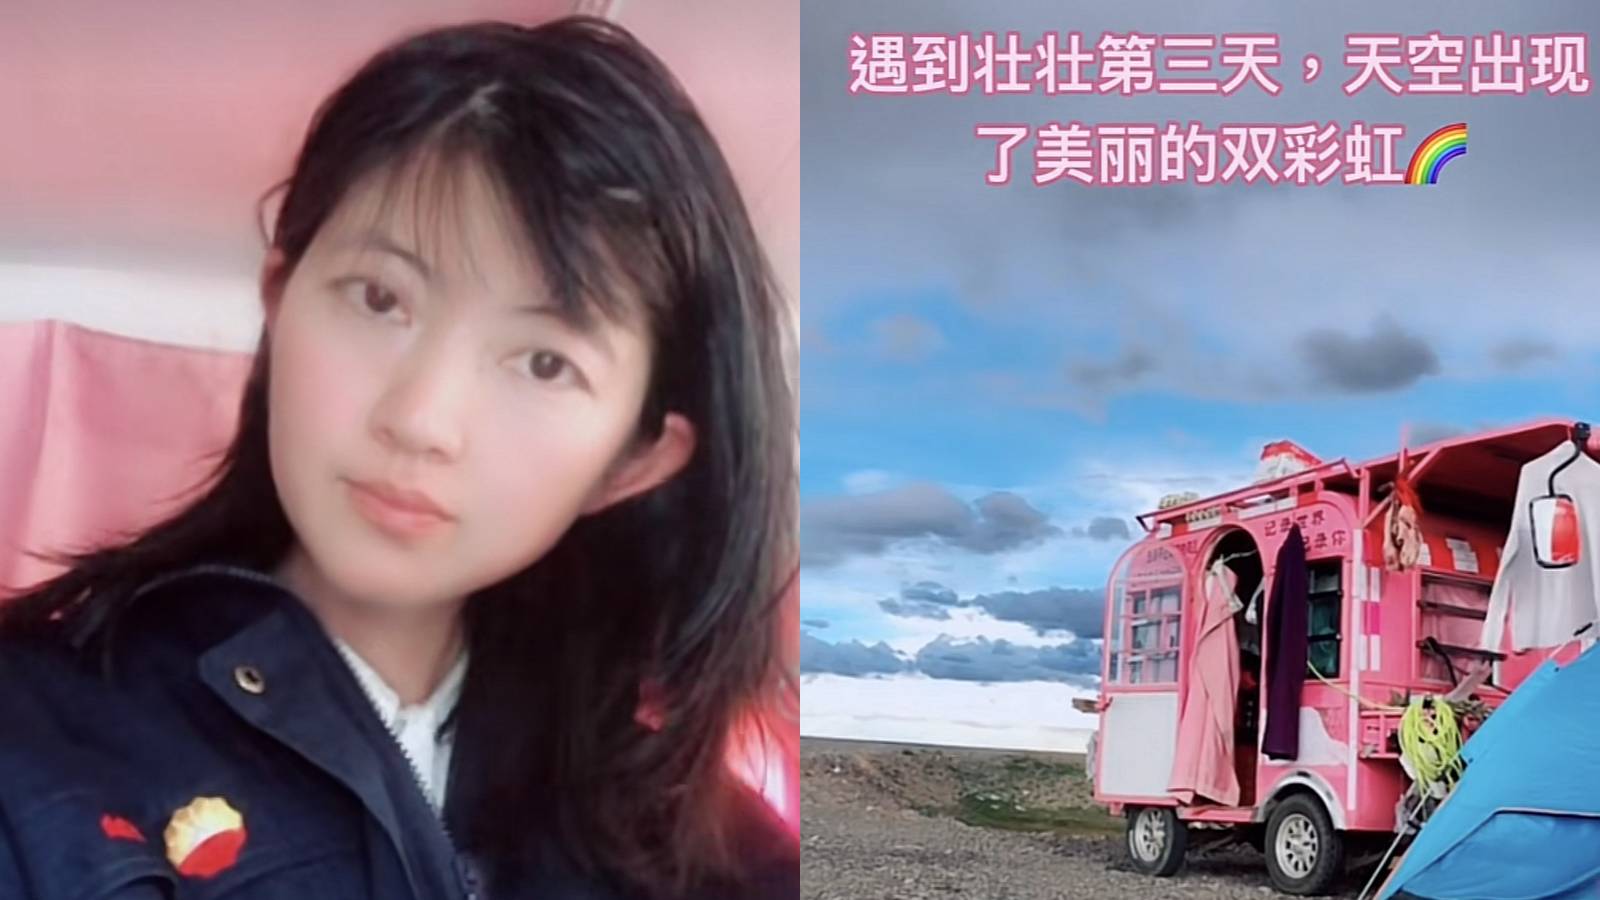 22-Year-Old Chinese Streamer, Who Was Travelling Solo Around Tibet, Dies After Tragic Live Stream Mishap